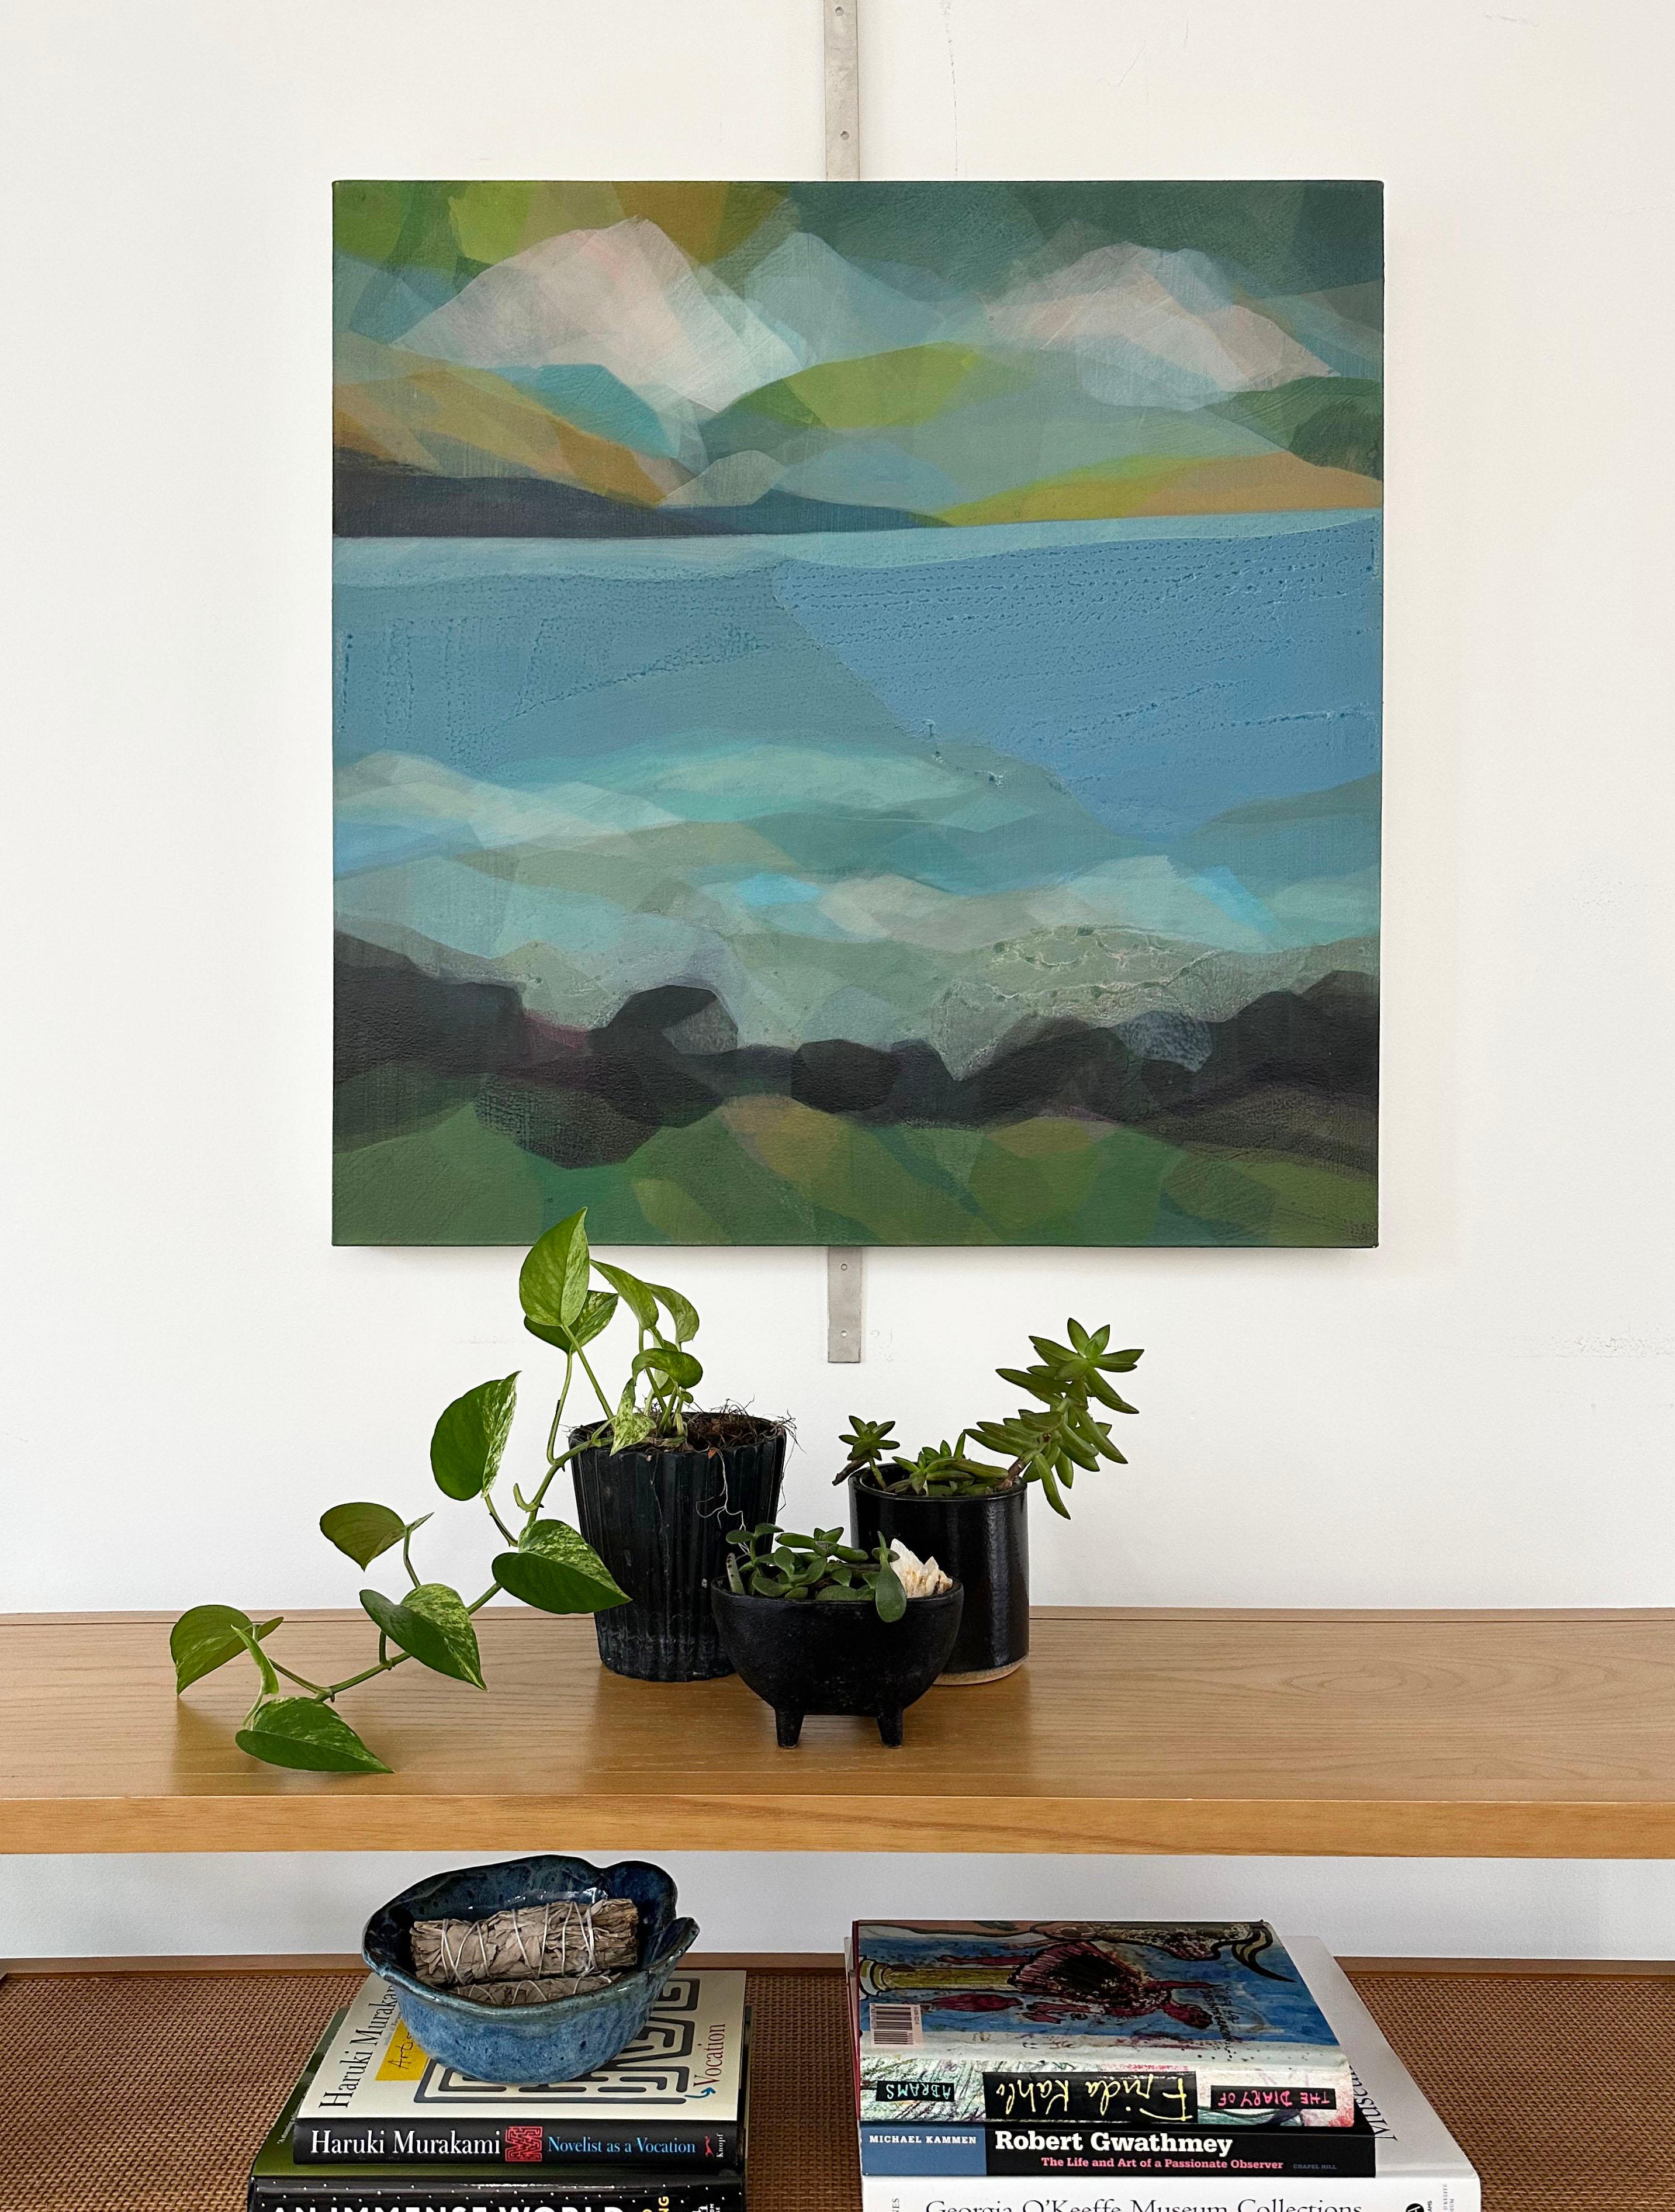 This painting is an abstract landscape on canvas featuring vibrant and dark layers of green, yellow, orange and blue.

Katherine Sandoz is inspired by the work of Helen Frankenthaler, Richard Diebenkorn, Morris Louis, Vincent Van Gogh, Willem de